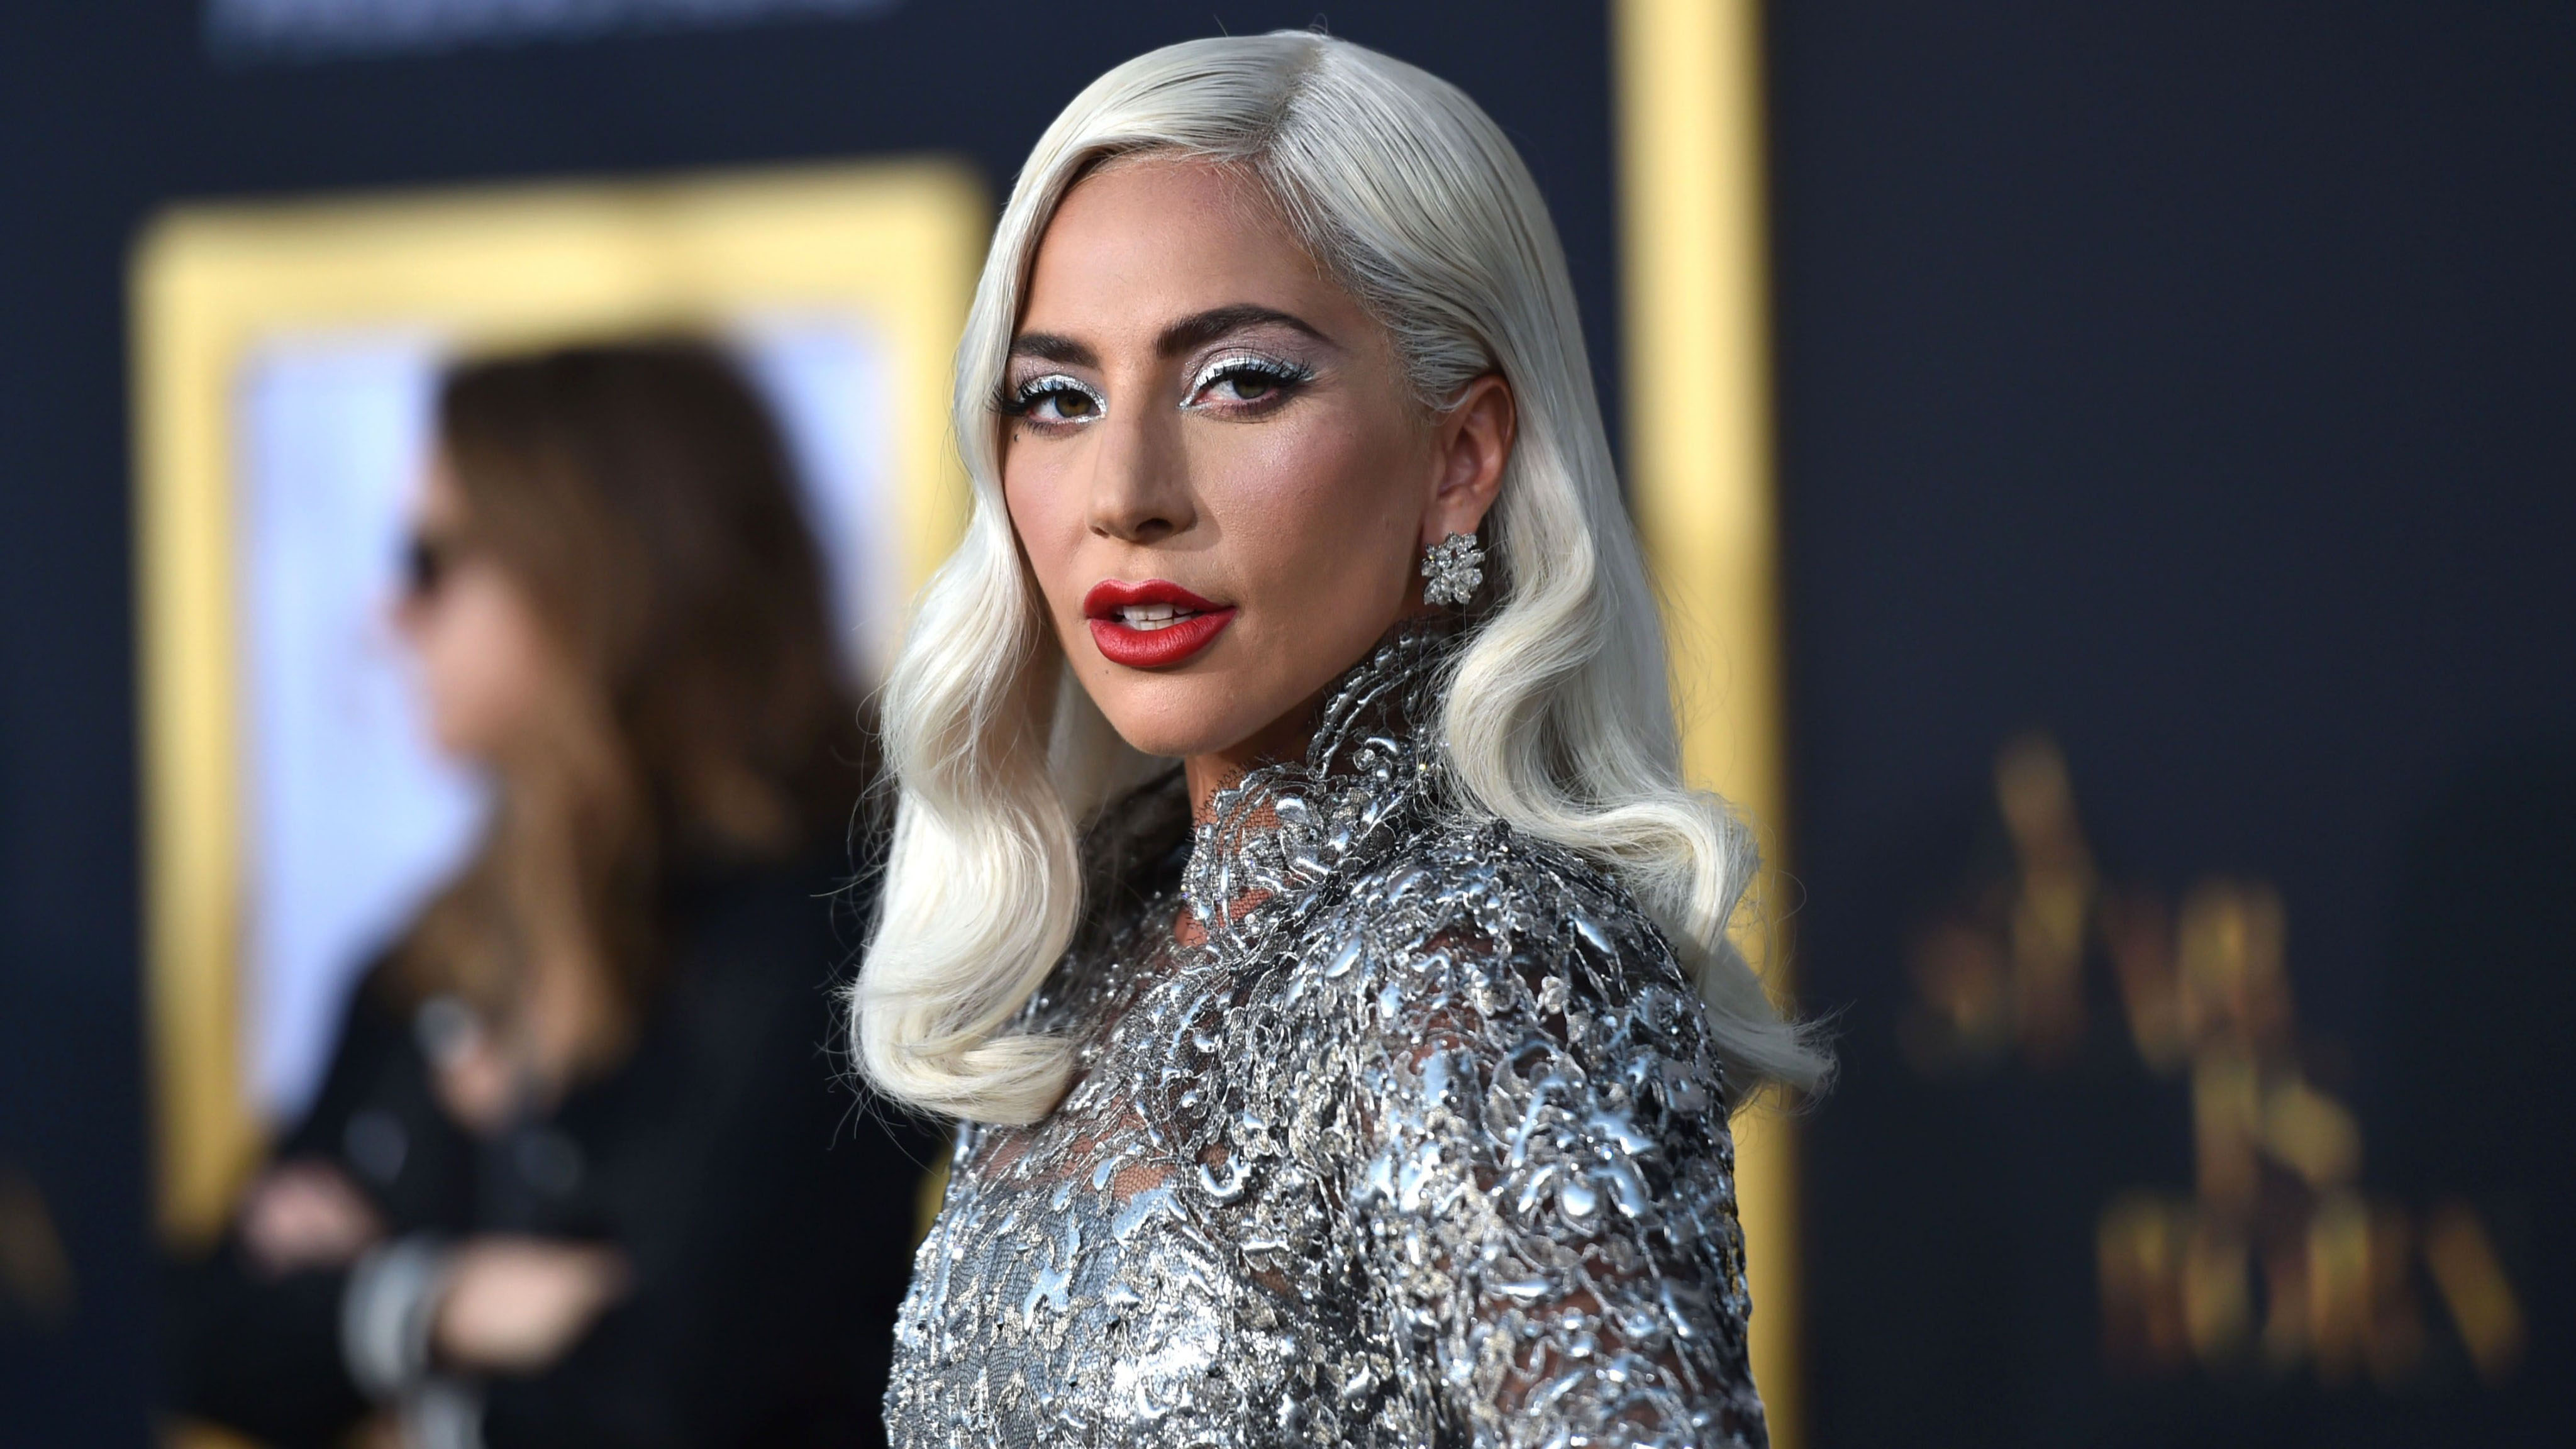 Stefani Joanne Angelina Germanotta (/?st?f?ni ?d???rm??n?t?/ STEF-?n-ee JUR-m?-NOT-?) (born March 28, 1986), known professionally as Lady Gaga, is an ...